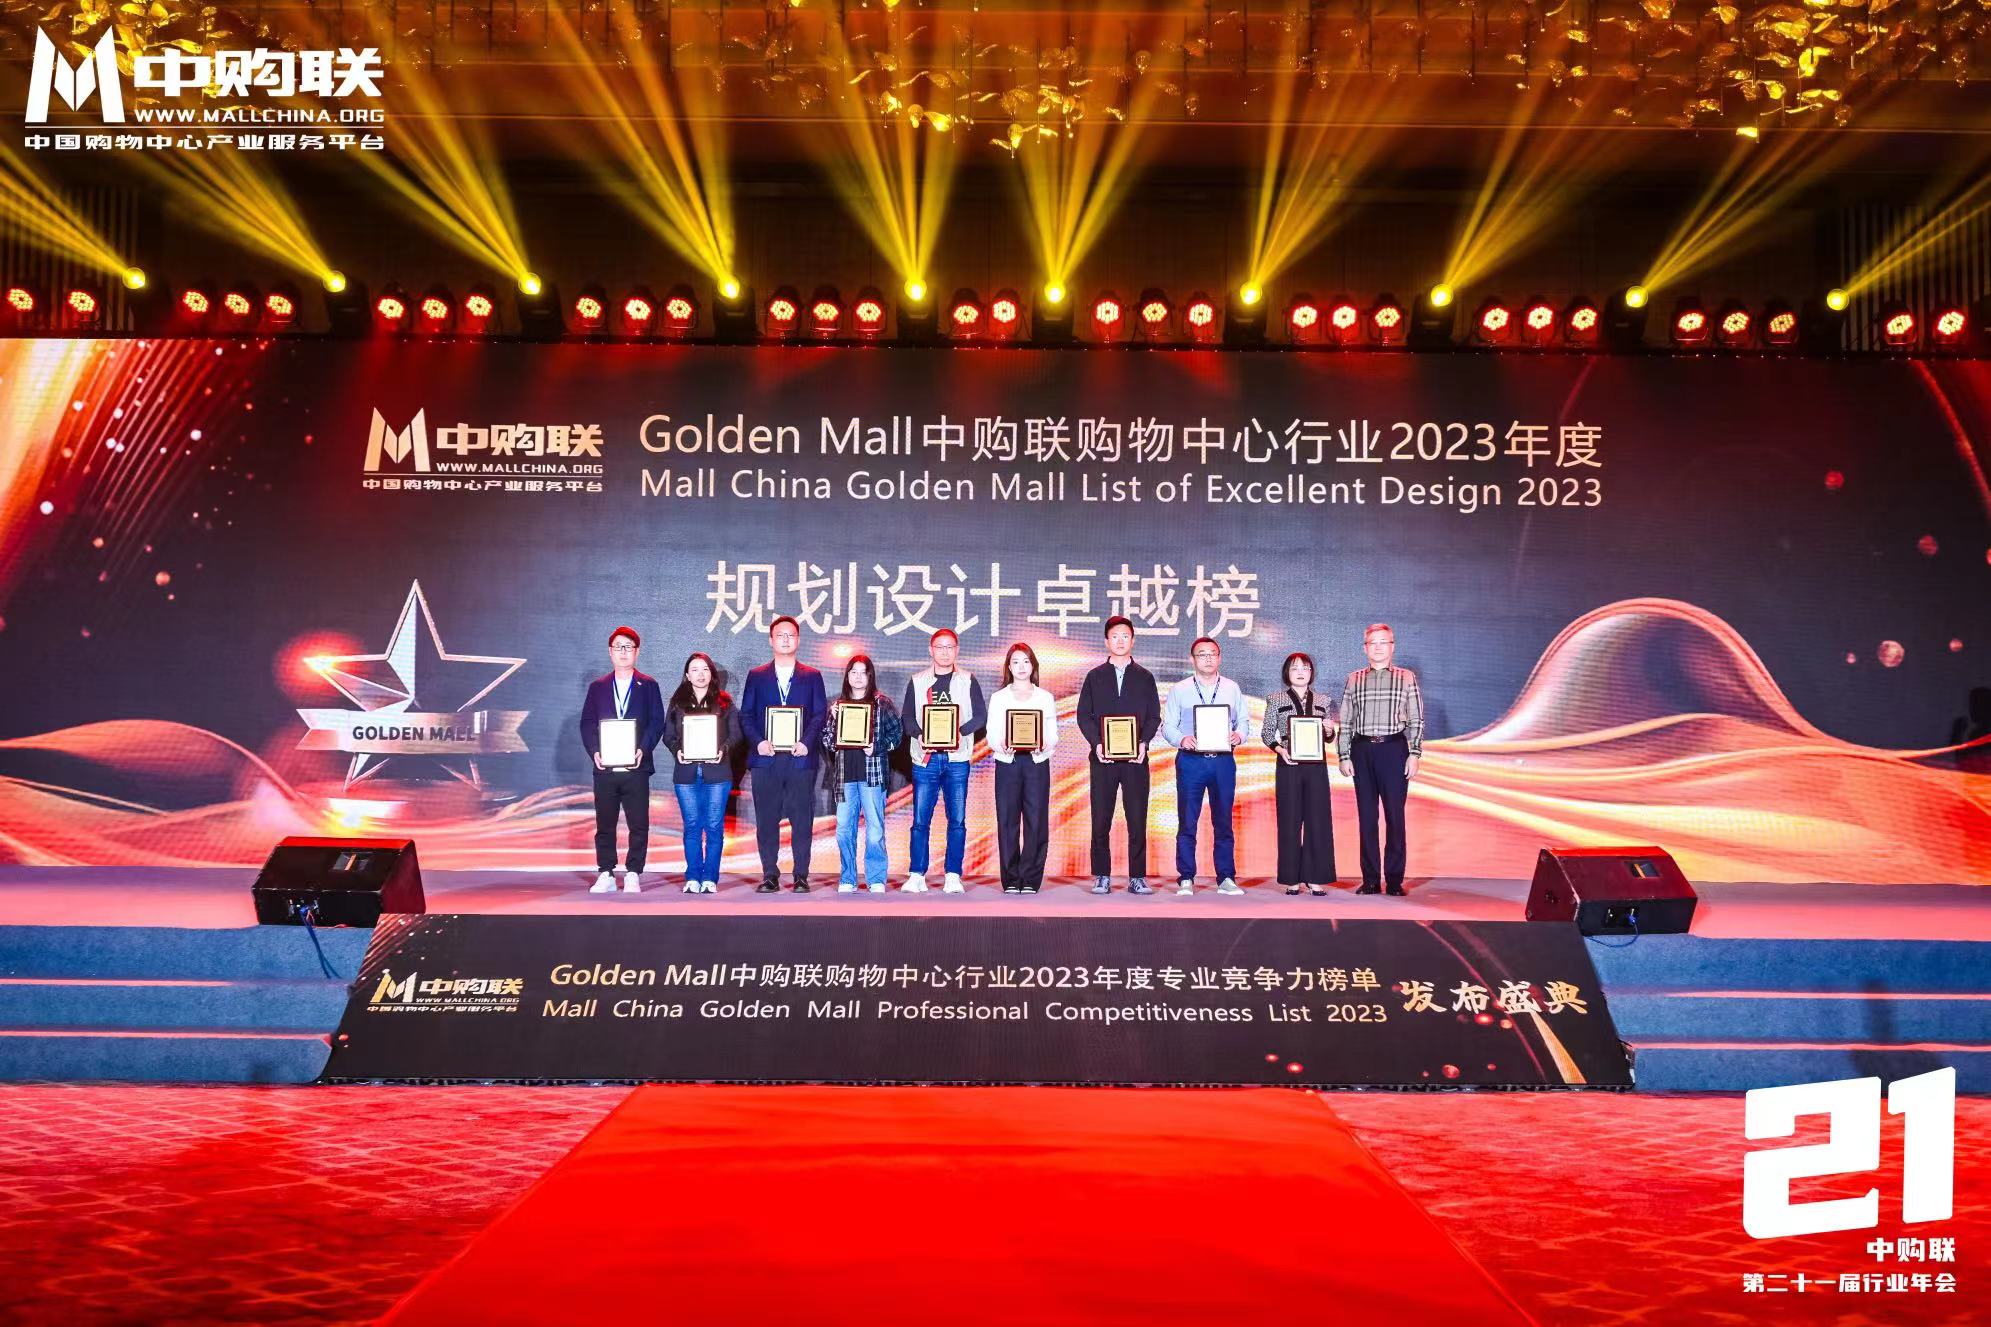 CHANGSHA HLS OUTLETS makes the Mall China Golden Mall List of Excellent Design 2023